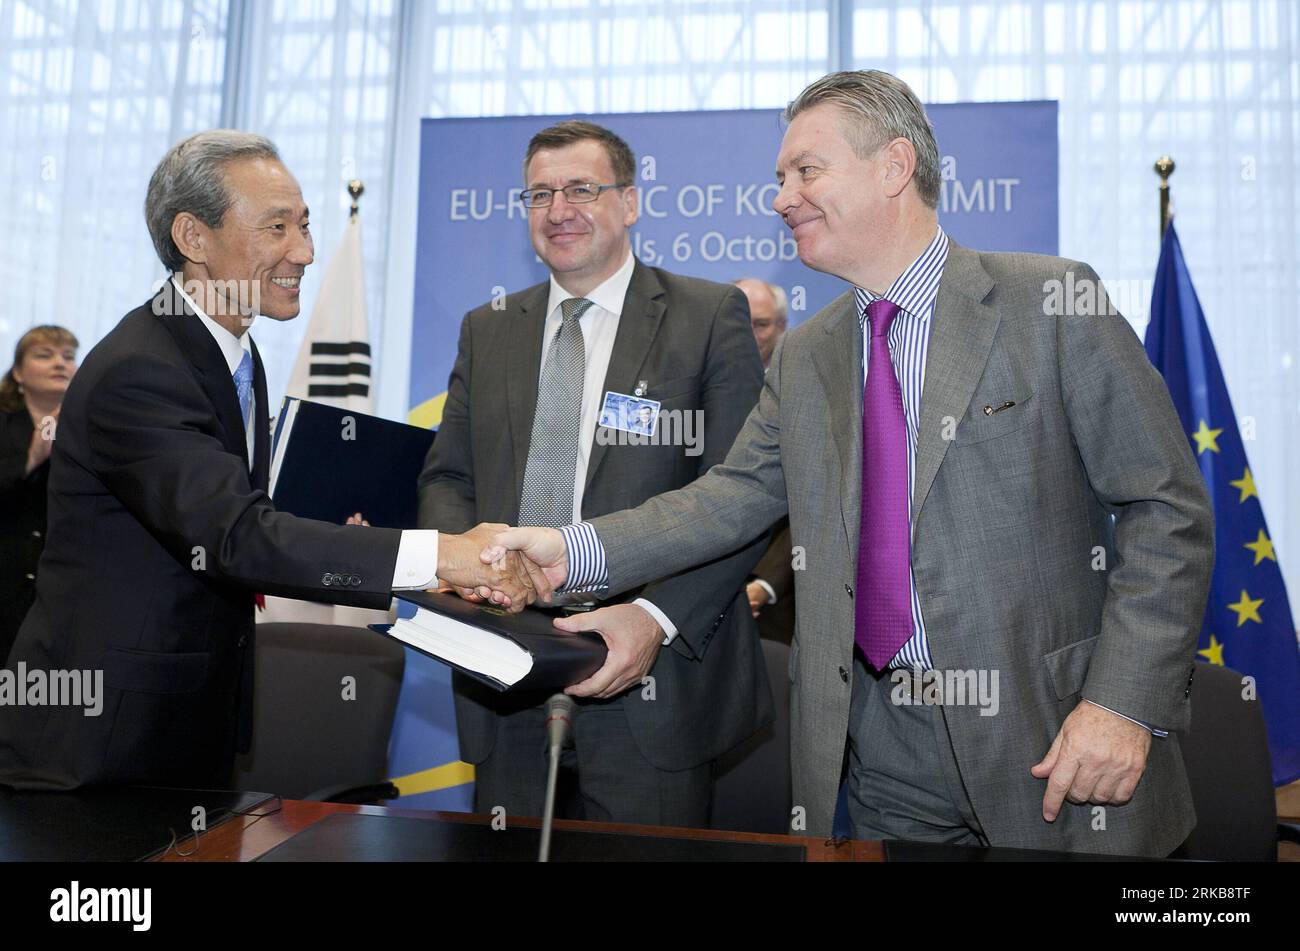 Bildnummer: 54515384  Datum: 06.10.2010  Copyright: imago/Xinhua (101006) -- BRUSSELS, Oct. 6, 2010 (Xinhua) -- South Korean Trade Minister Kim Jong-Hoon (L) shakes hands with European Commissioner for Trade Karel de Gucht (R) as Belgian Minister for Foreign Affairs, President of the European Ministers Council Steven Vanackere (C) looks on after the signing ceremony of a EU-South Korea Free-Trade Agreement in Brussels, capital of Belgium, Oct. 6, 2010. EU and South Korea signed a free trade agreement Wednesday at the EU-Republic of Korea Summit. (Xinhua/Thierry Monasse)(gj) BELGIUM-BRUSSELS-EU Stock Photo